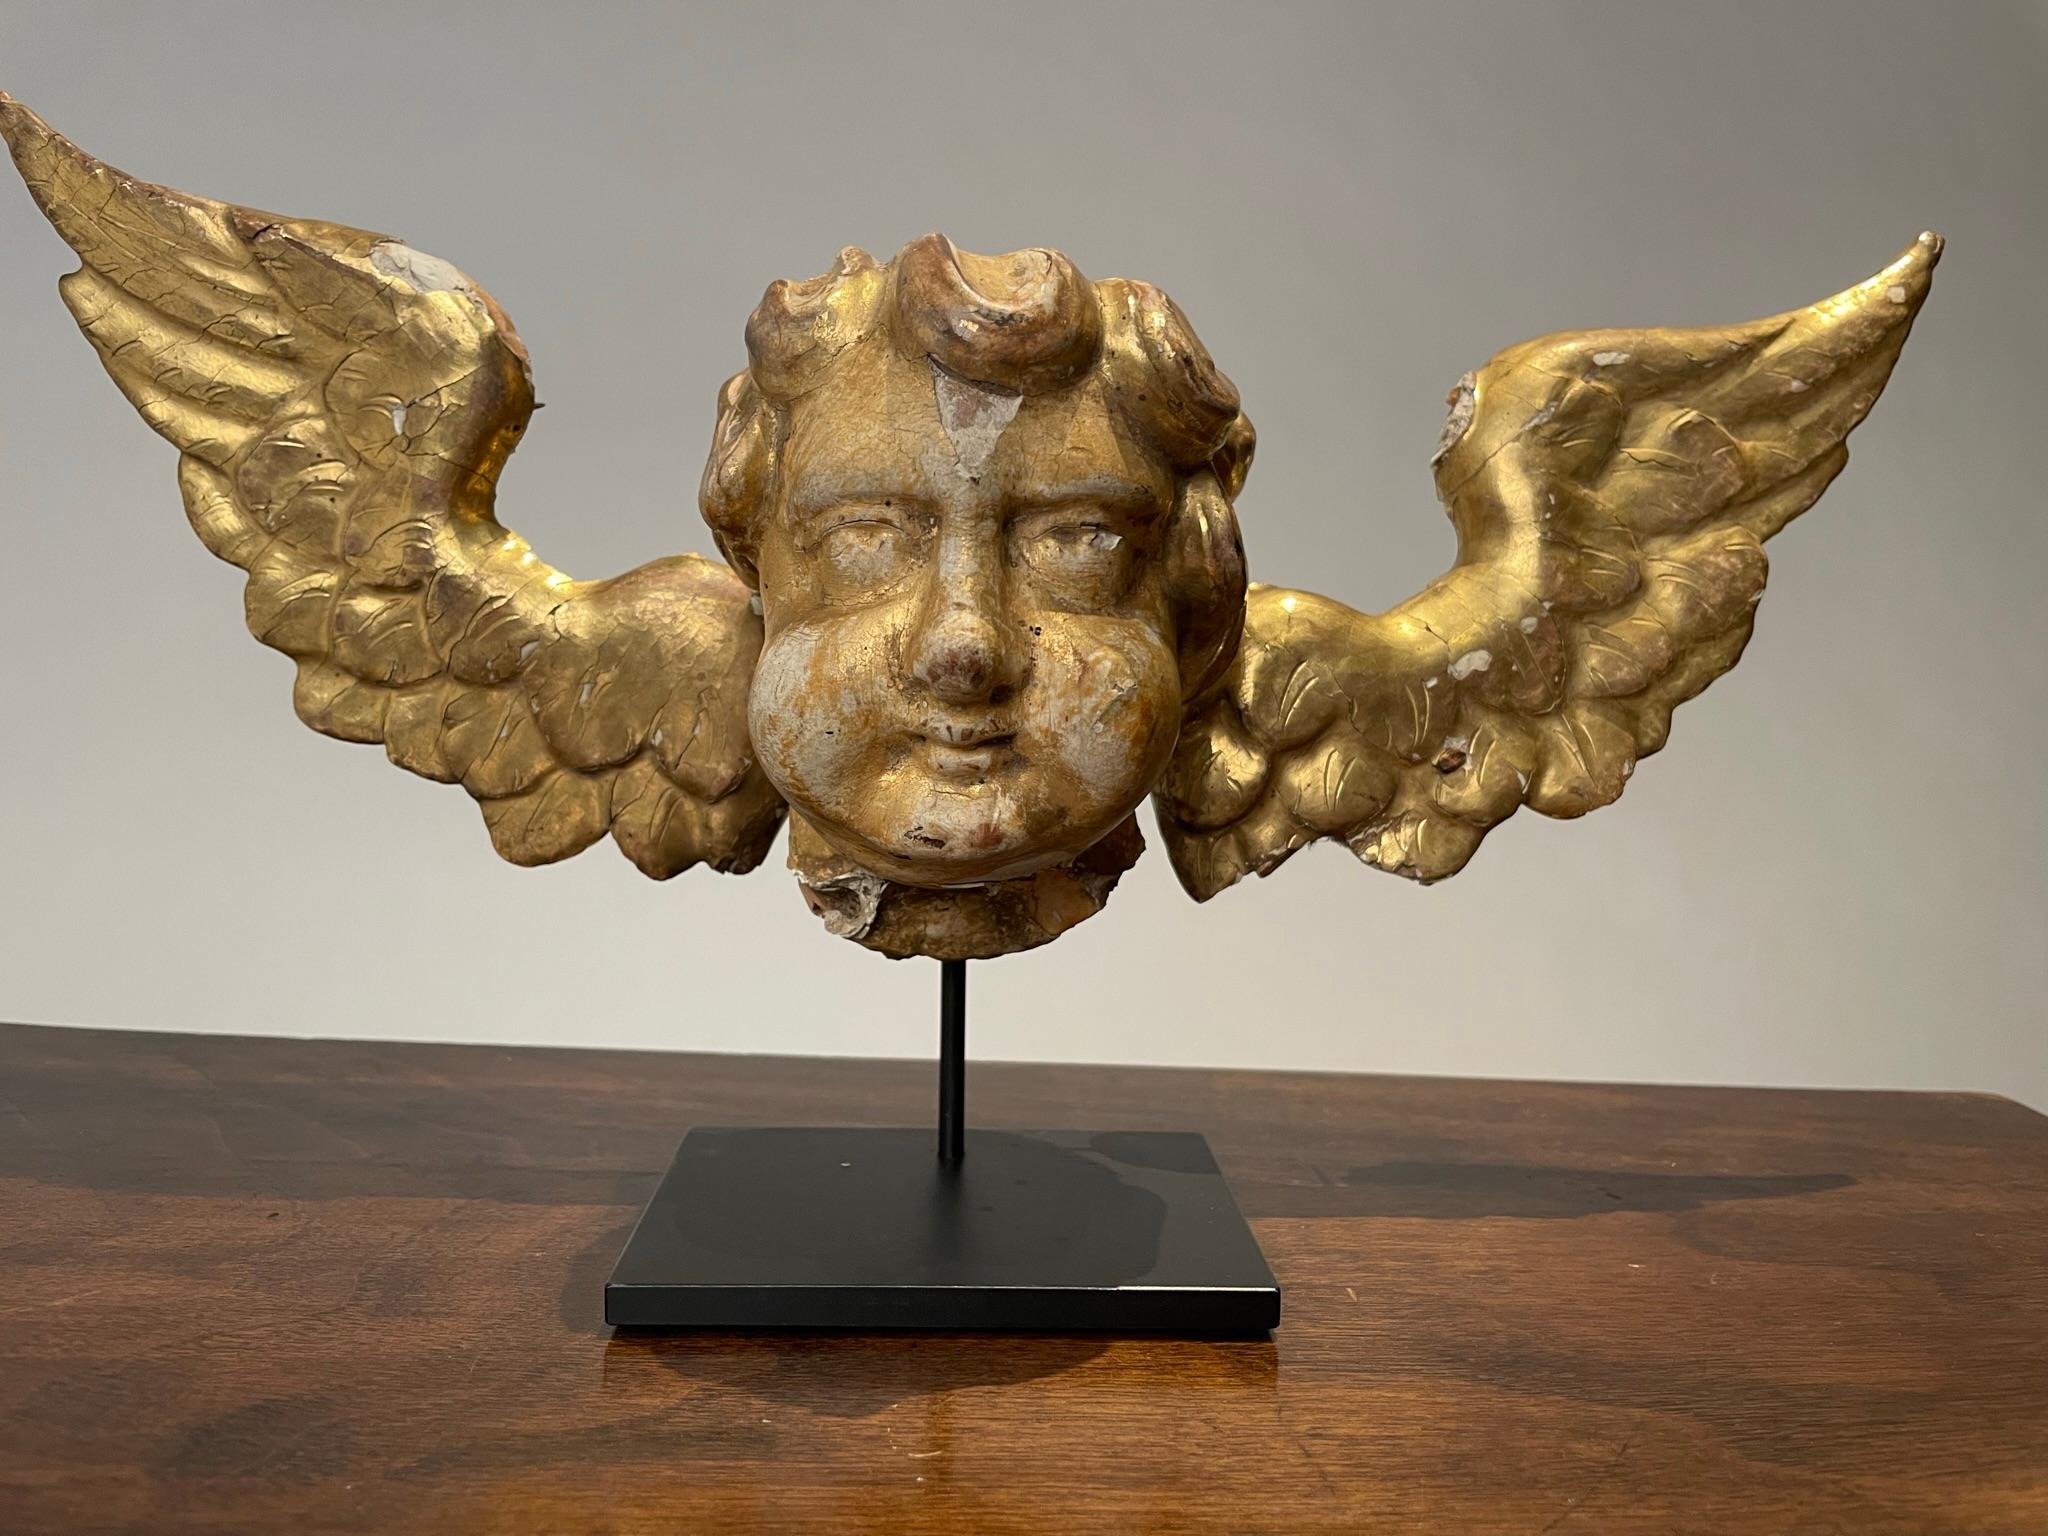 Charming 18th century Italian gilt wood putto with wings now mounted on a custom black steel base. Likely originally part of a relief panel, with the old hand wrought nails still visible on the back. Wonderful surface, the white of the the gesso